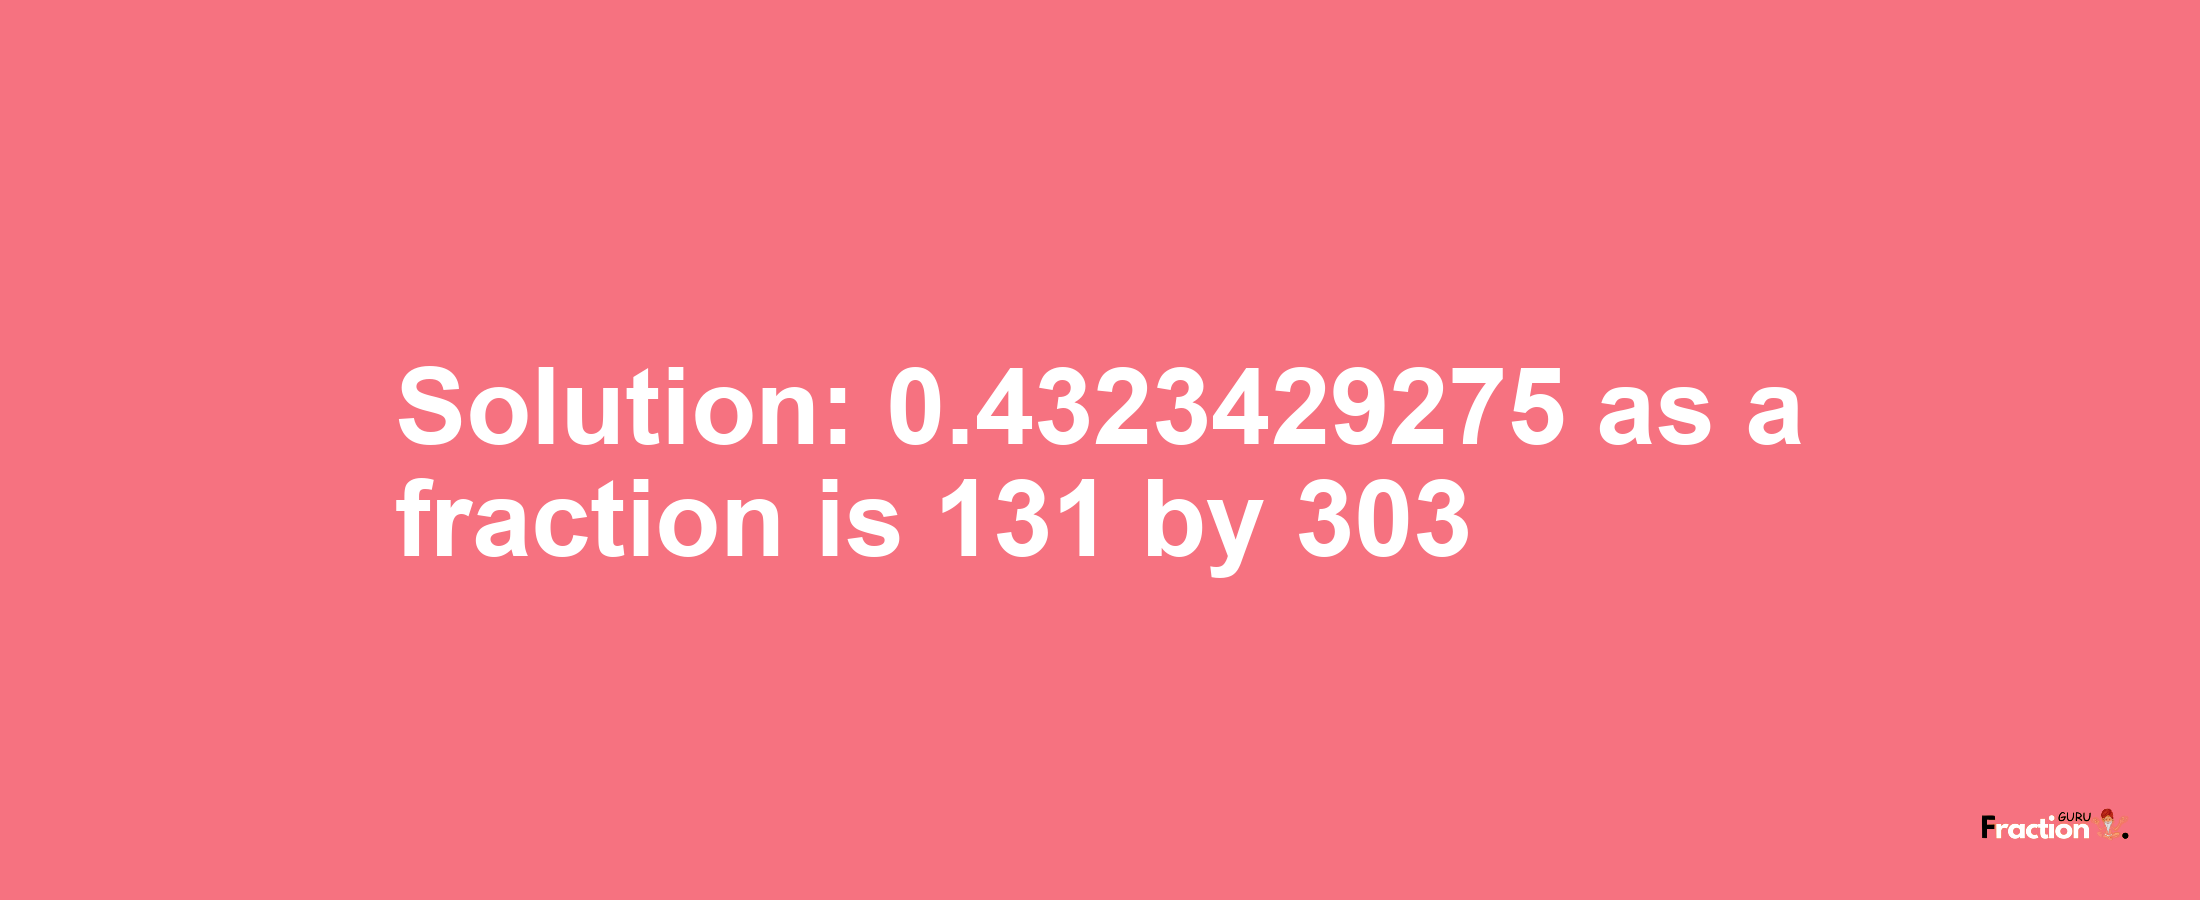 Solution:0.4323429275 as a fraction is 131/303